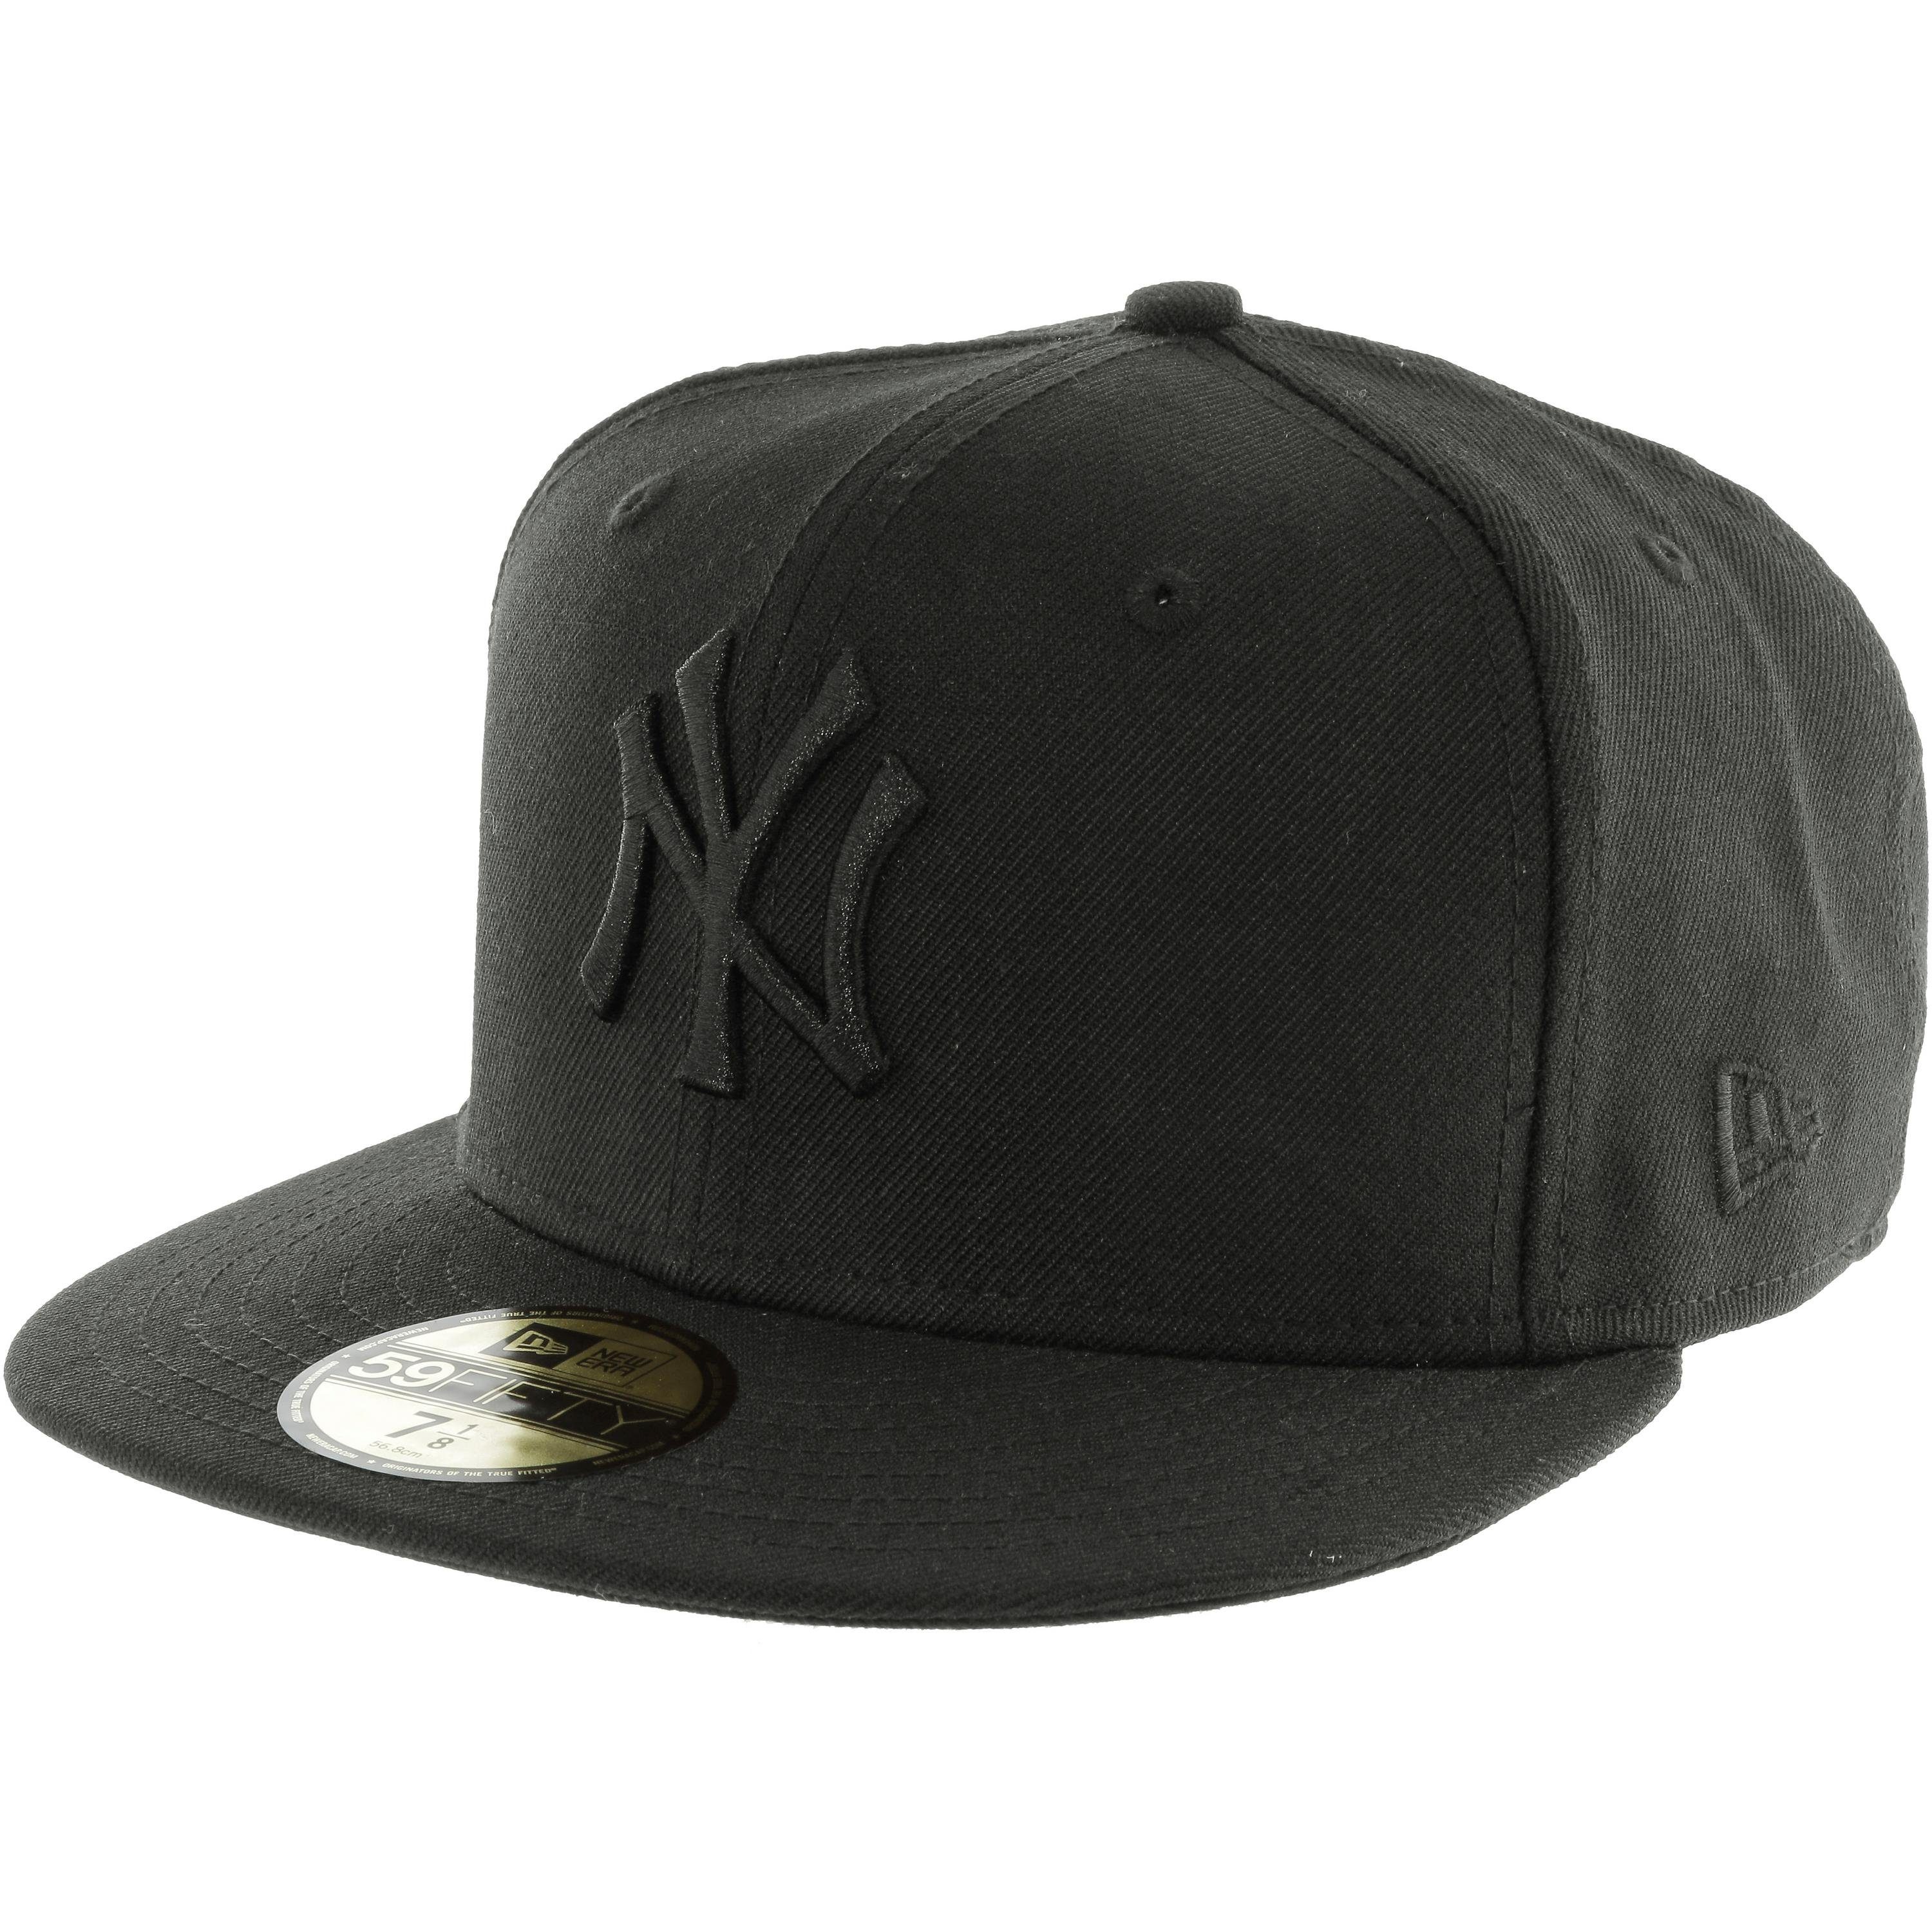 New Era 59fifty Fitted NY schwarz Yankees Cap